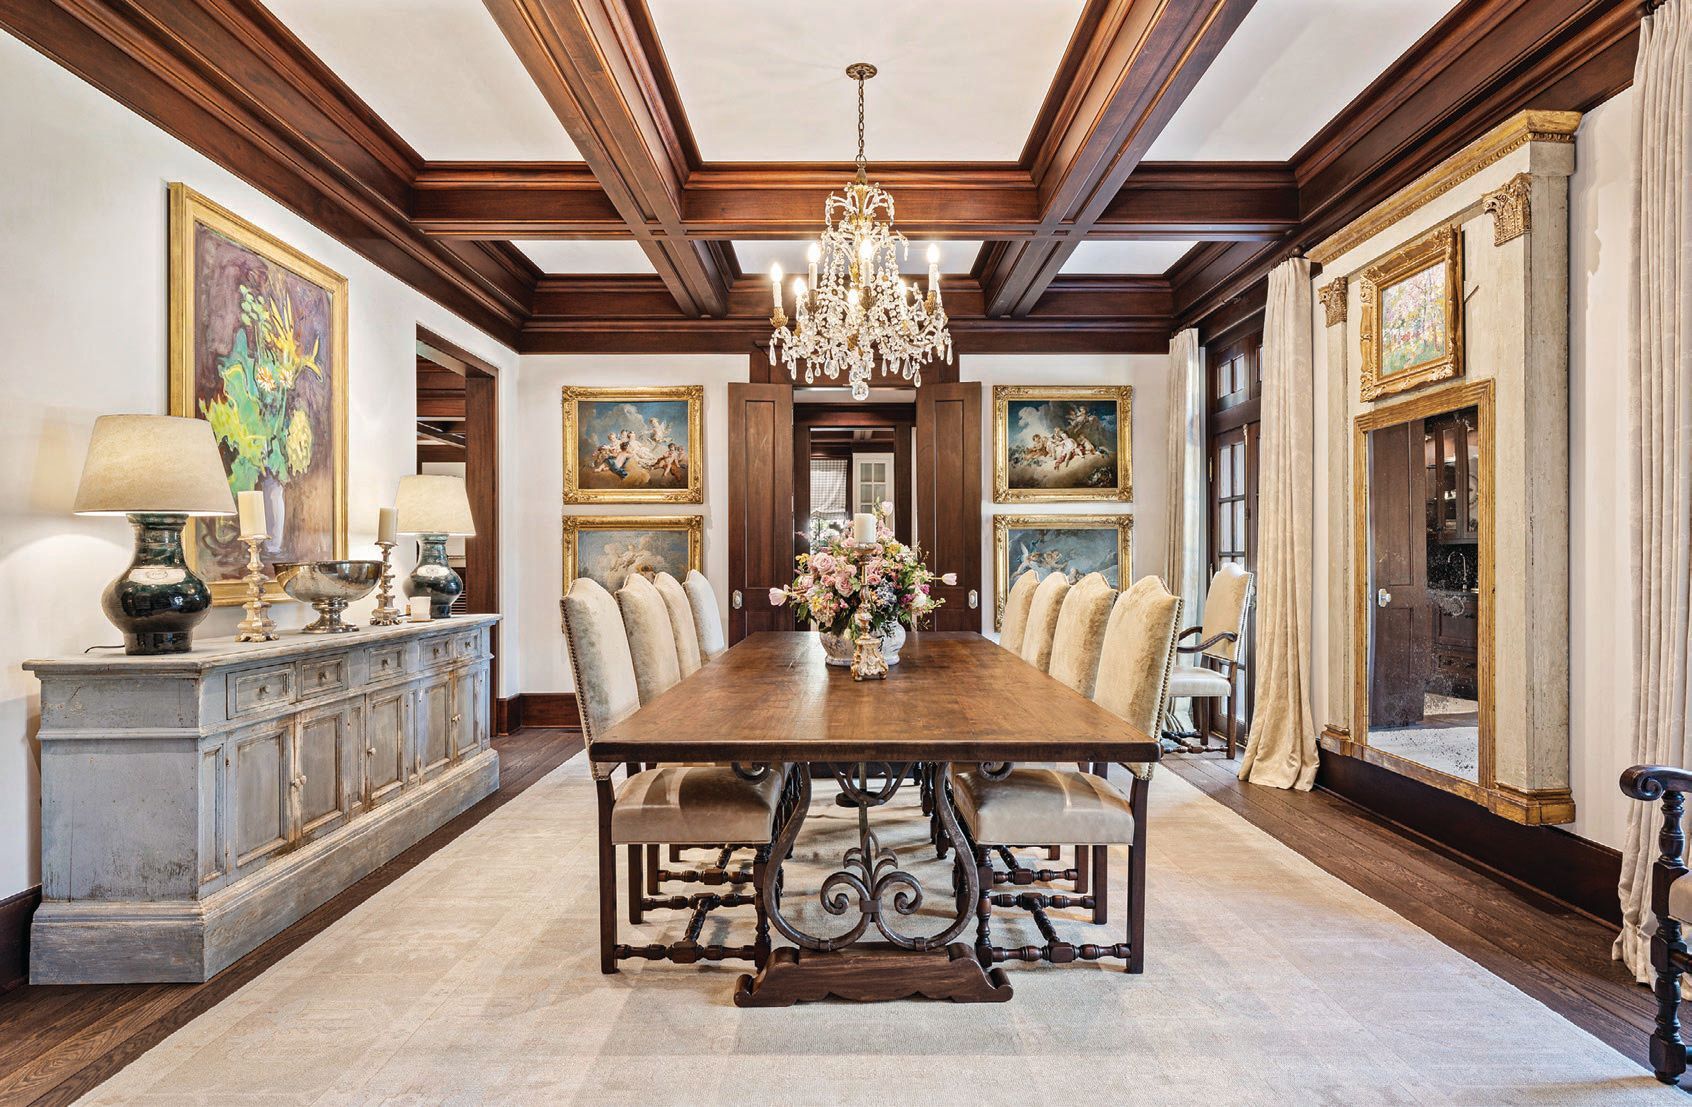 Grandeur abounds at this covetable home featuring exquisite furnishings, chic design and an incredible collection of artwork. PHOTO COURTESY OF JOSH GEMILLION FOR DOUGLAS ELLIMAN REALTY